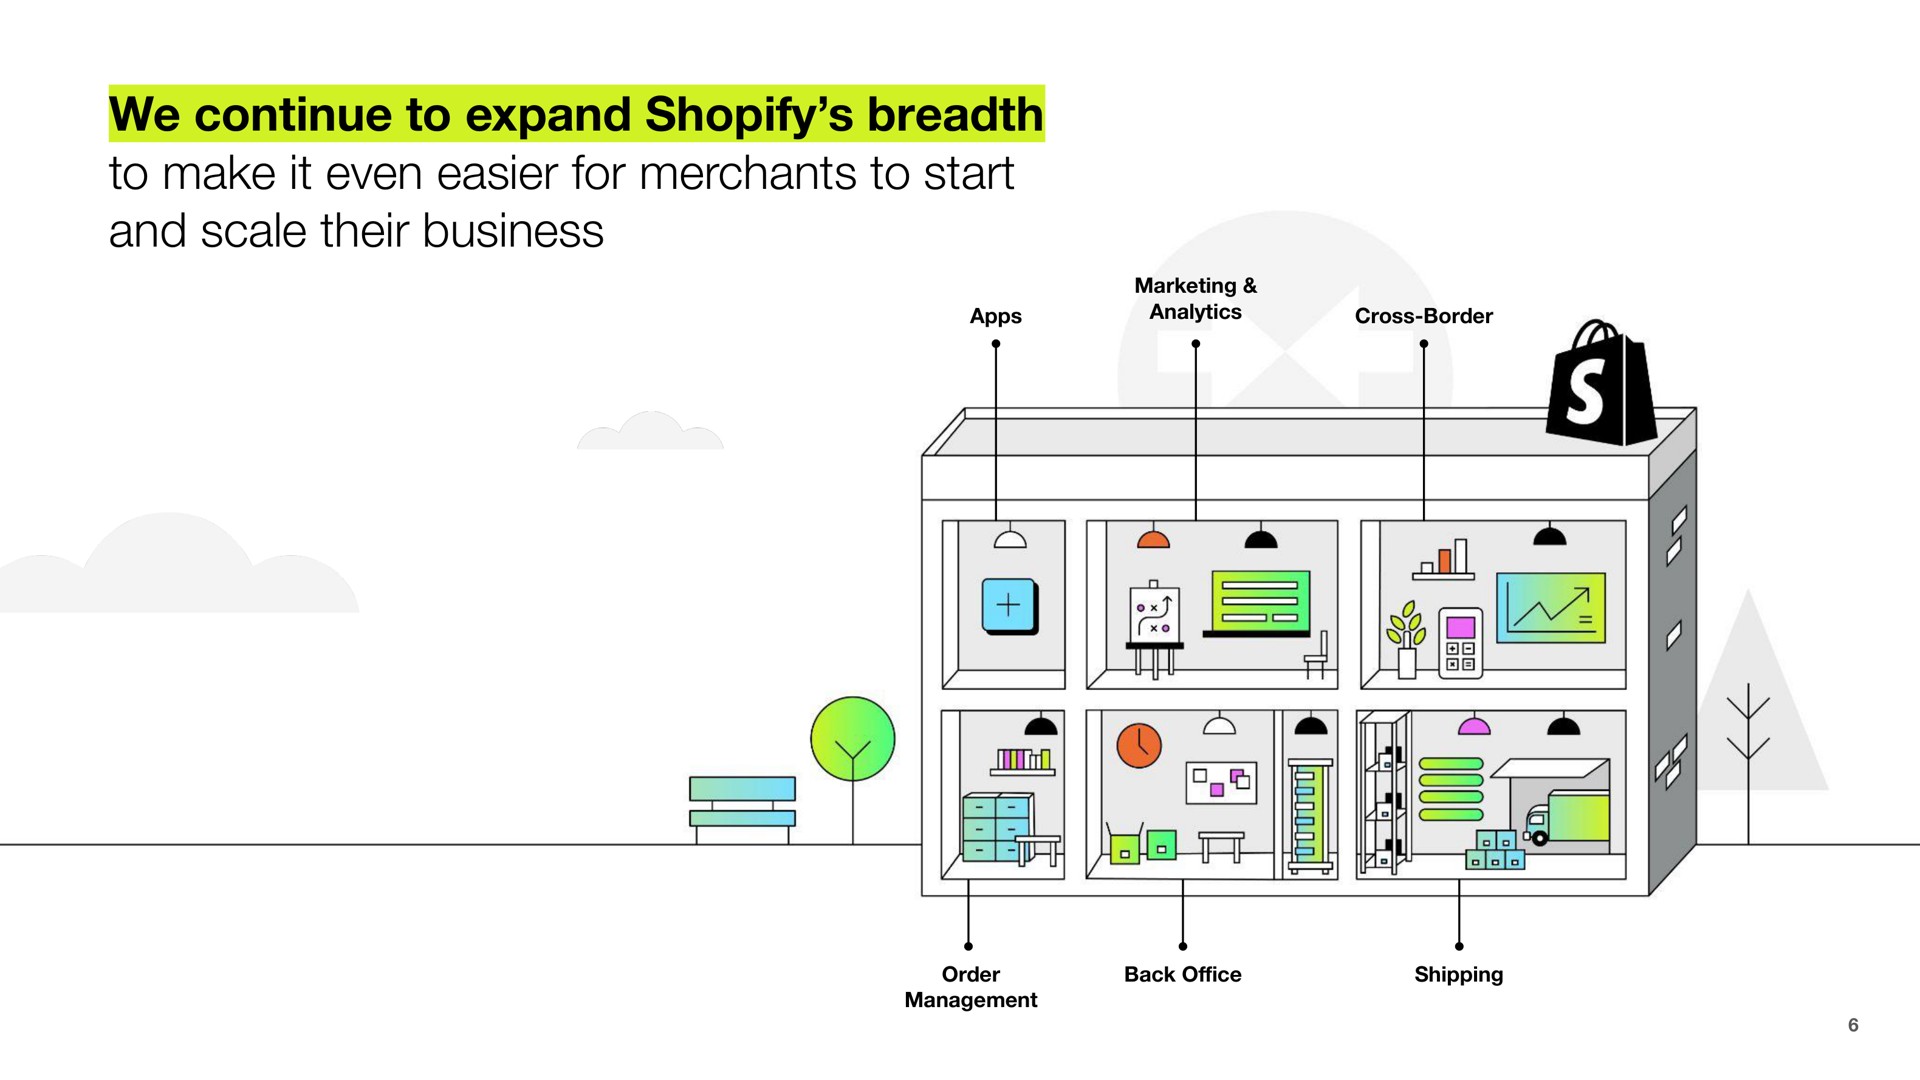 we continue to expand breadth to make it even easier for merchants to start and scale their business | Shopify